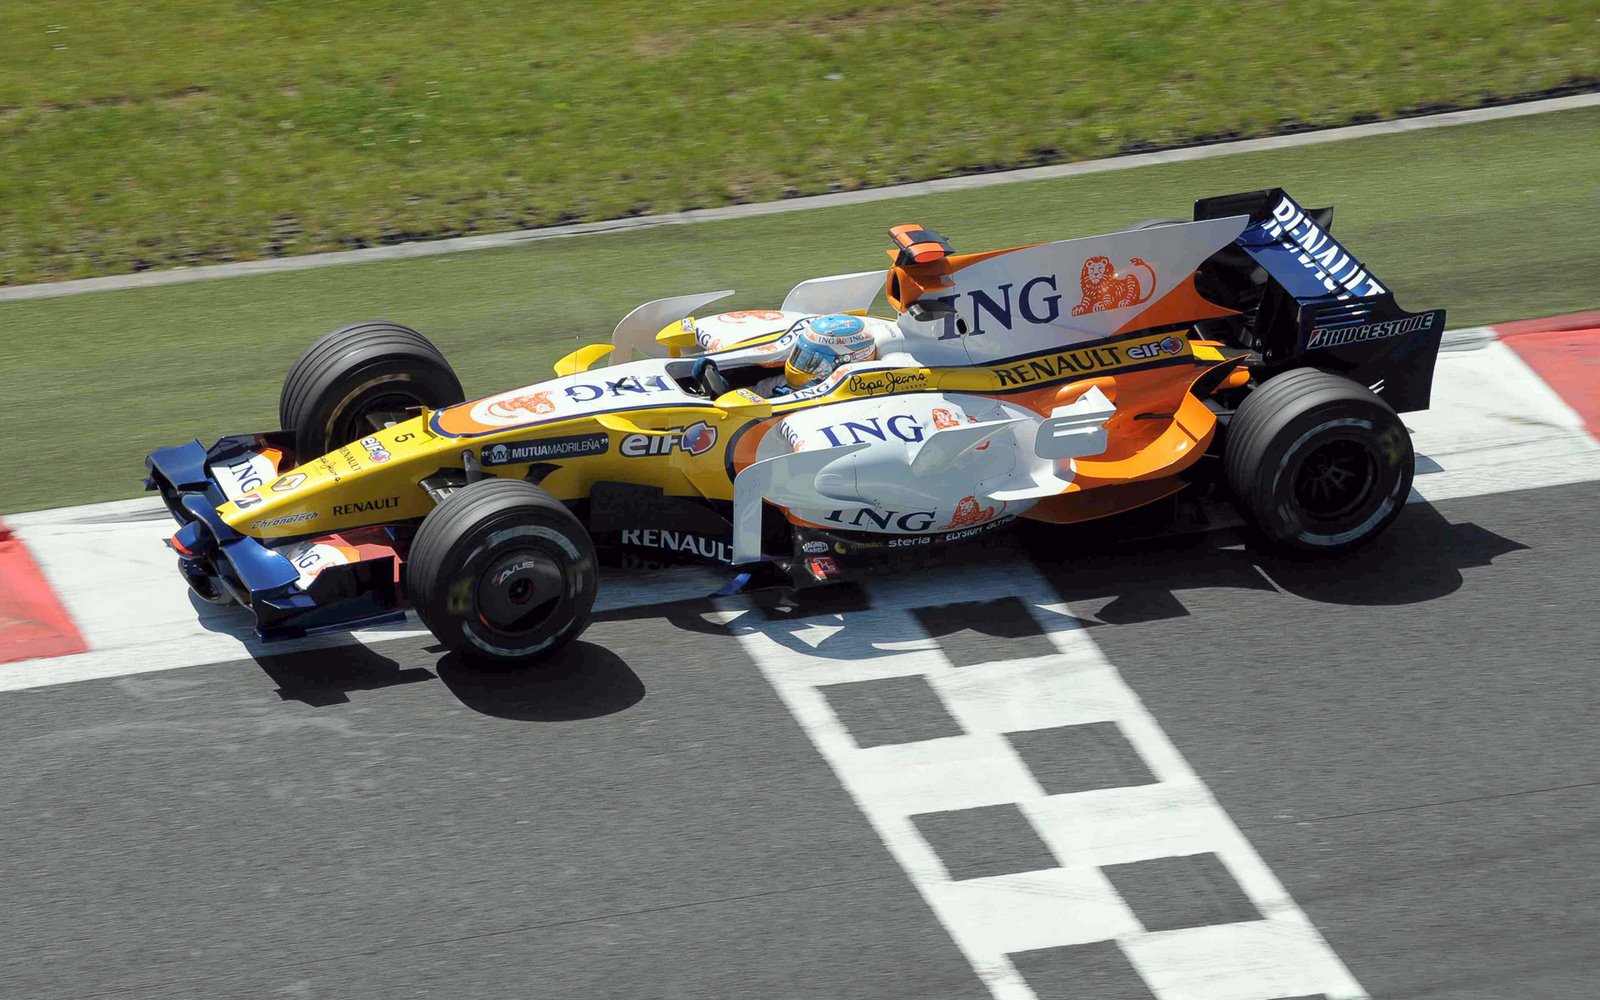 [Fernando+Alonso+Renault+Saturday+Qualifying+session+France+Magny+Cours,+F1+2008++32.jpg]